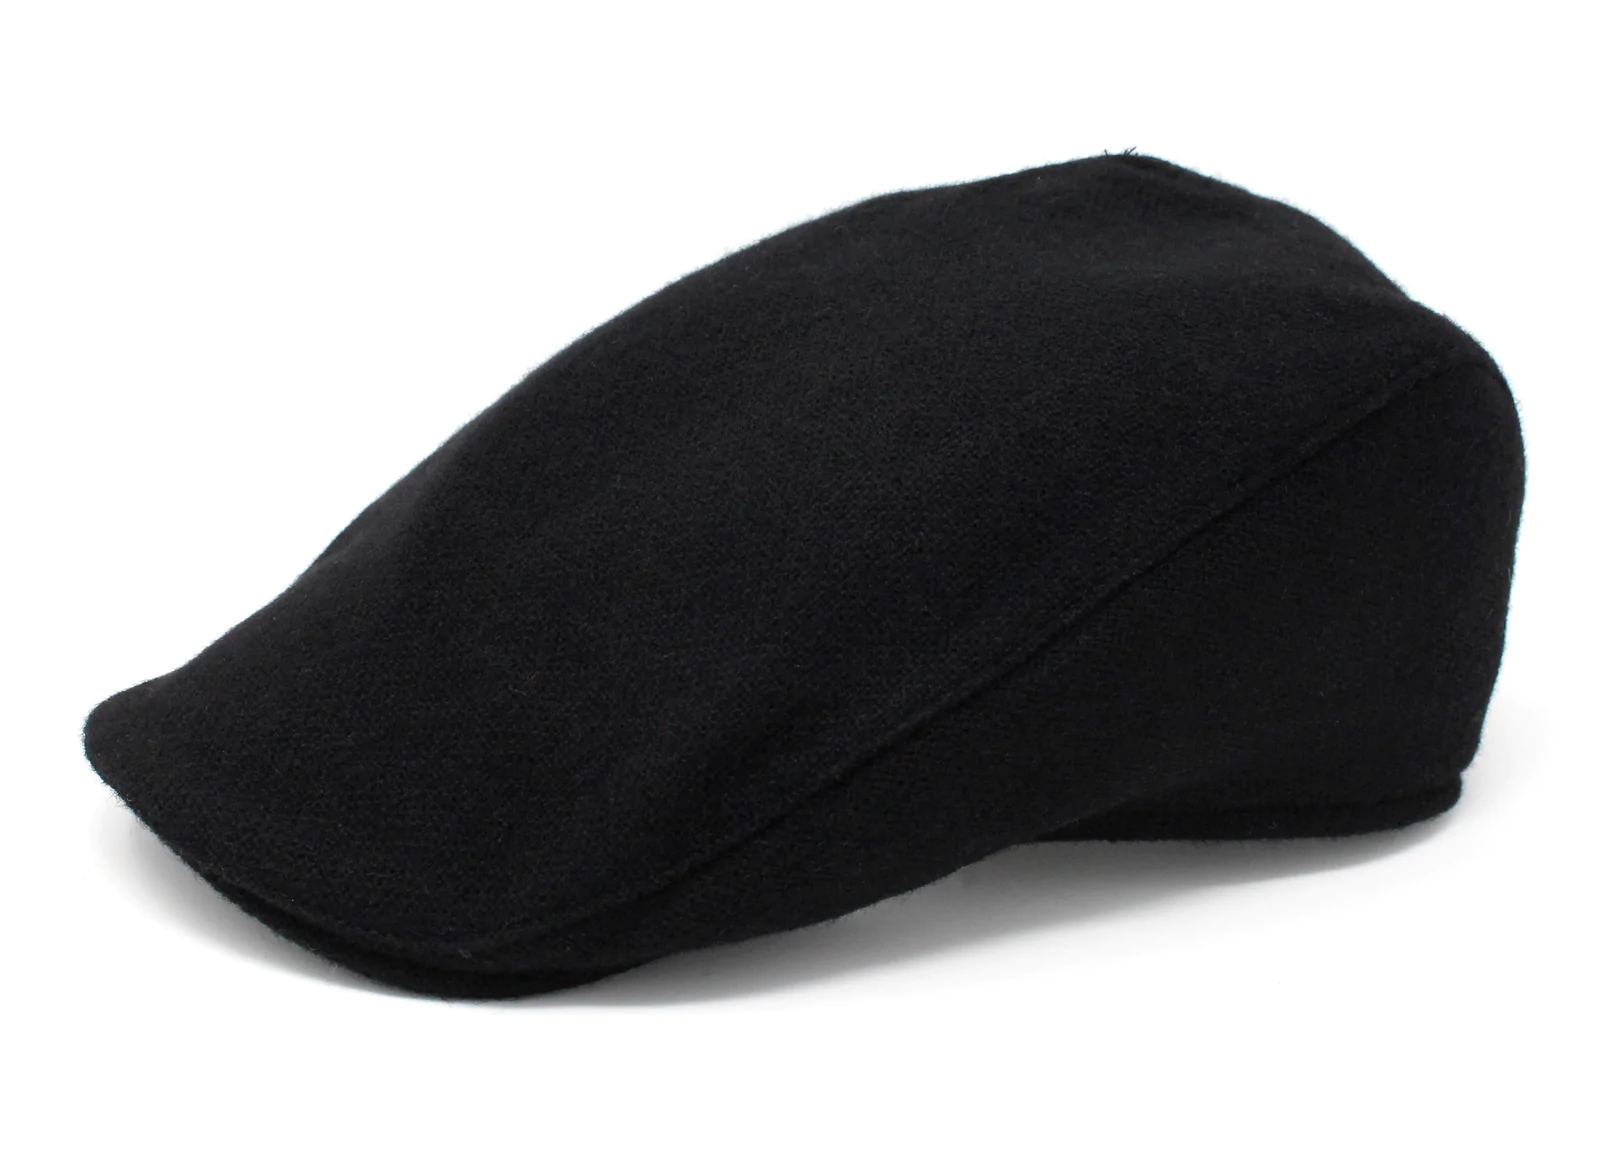 A black hat is sitting on the ground.